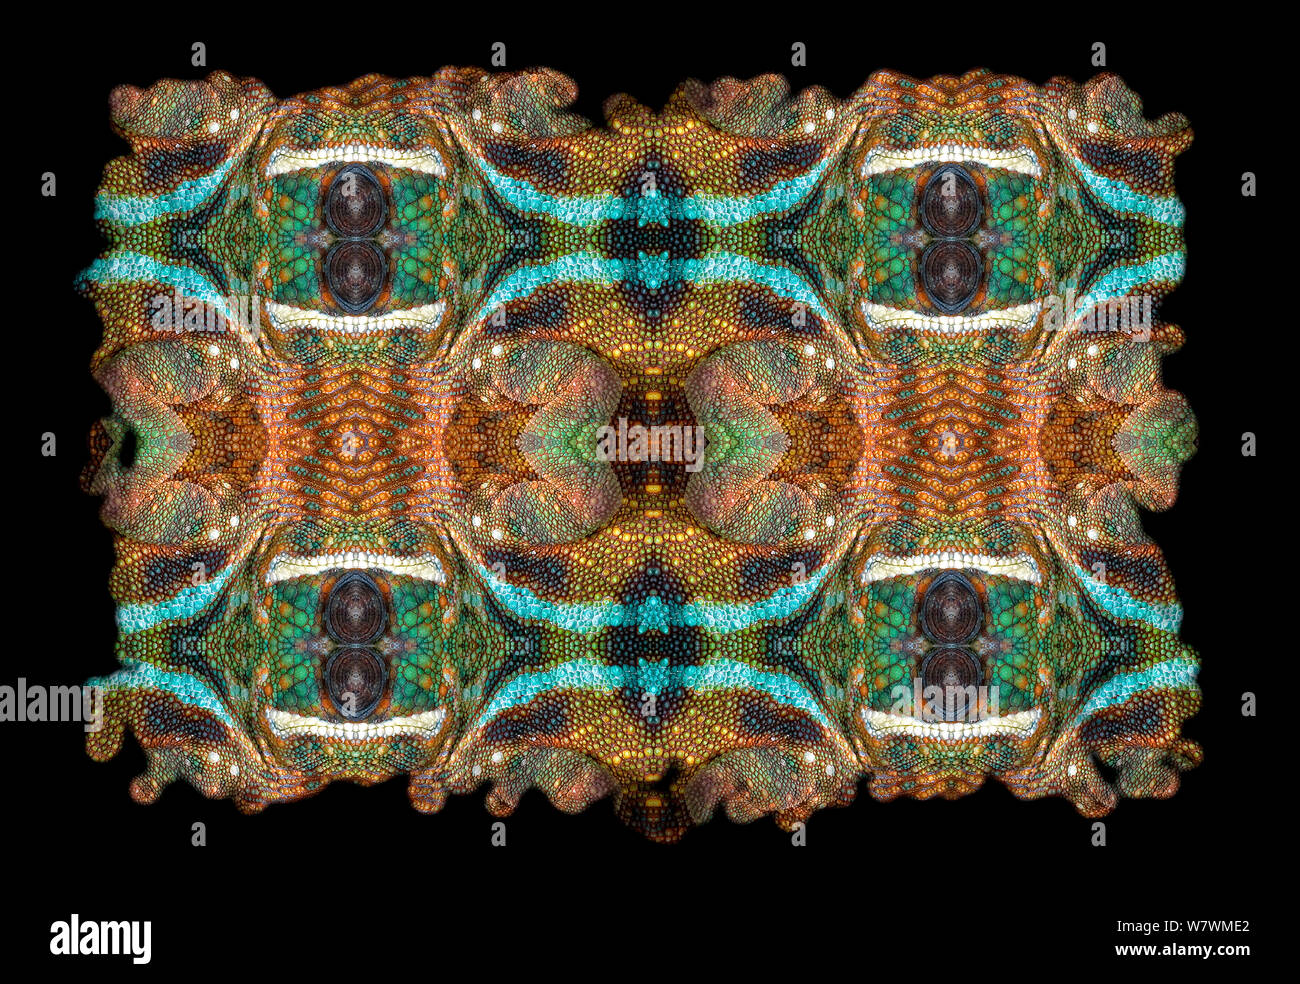 Kaleidoscope pattern formed from picture of Panther Chameleon (Furcifer pardalis) scales. Restricted for Editorial use until December 2015 Stock Photo